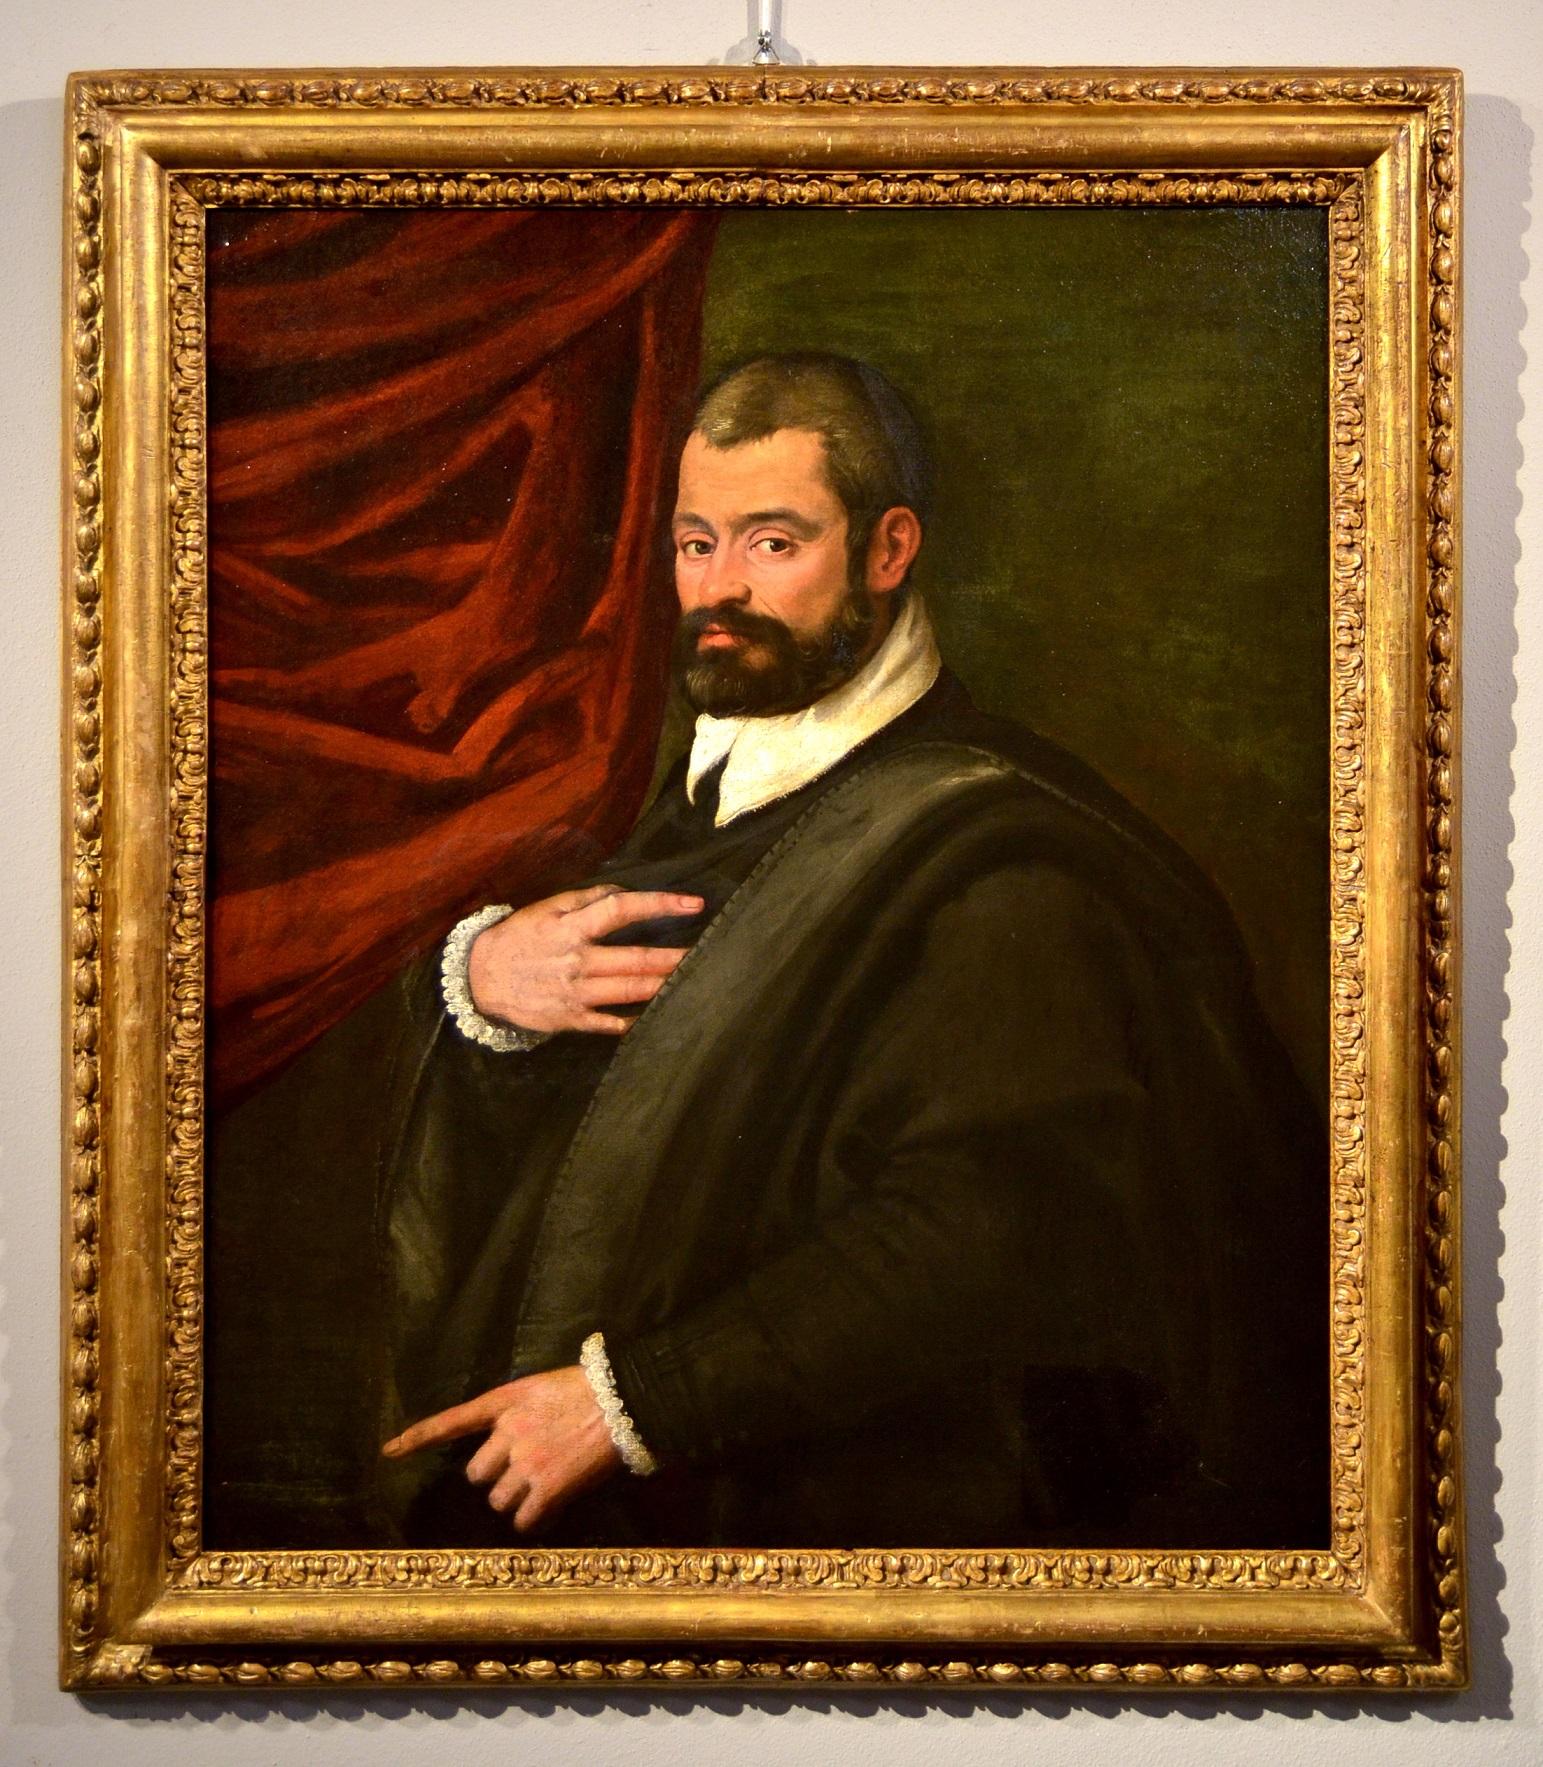 Leandro da Ponte known as Leandro Bassano (Bassano, 1557 - Venice, 1622), attributed to Portrait Painting - Paint Oil on canvas Portrait Venetian Tintoretto 16th Century Old master Italy 